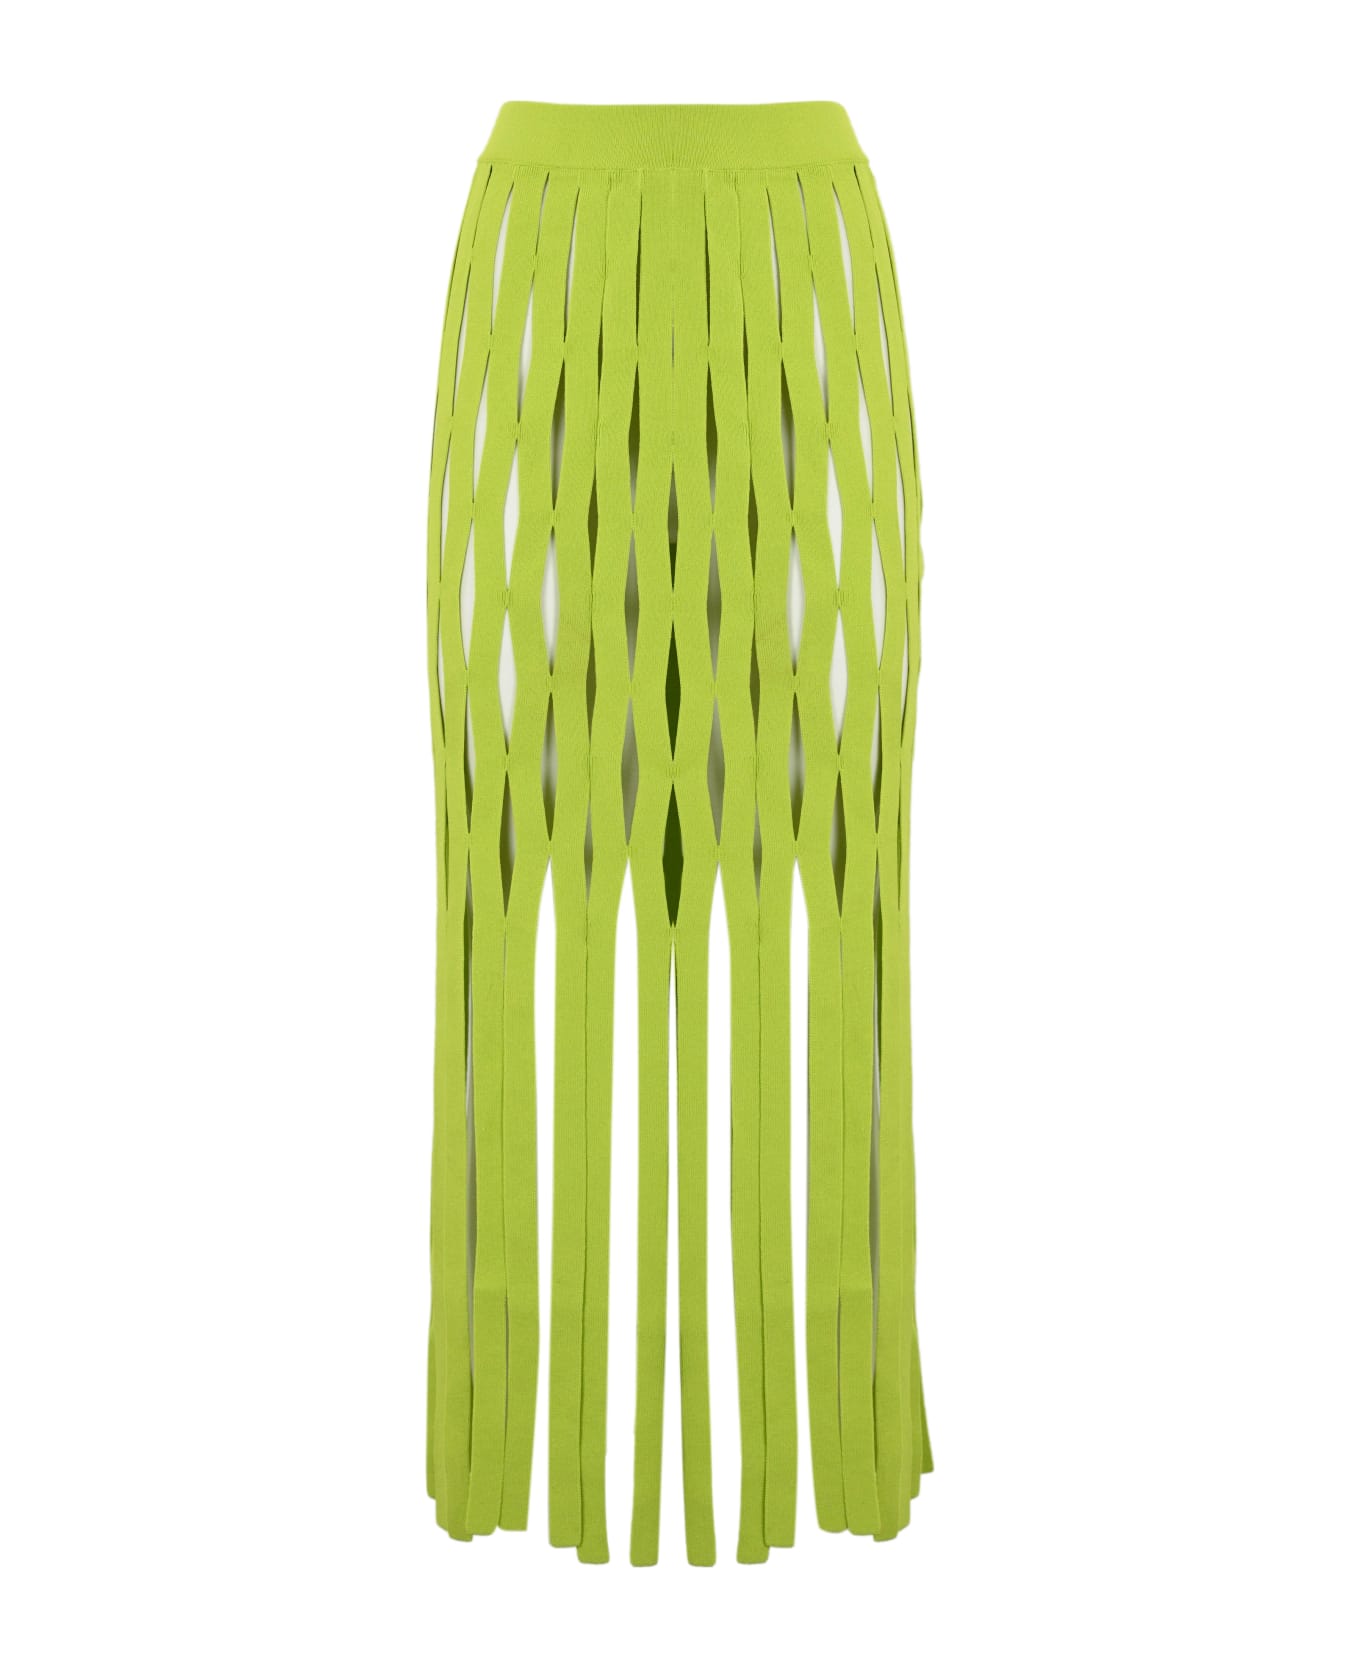 Liviana Conti Viscose Skirt With Ribbons - Cyber lime スカート